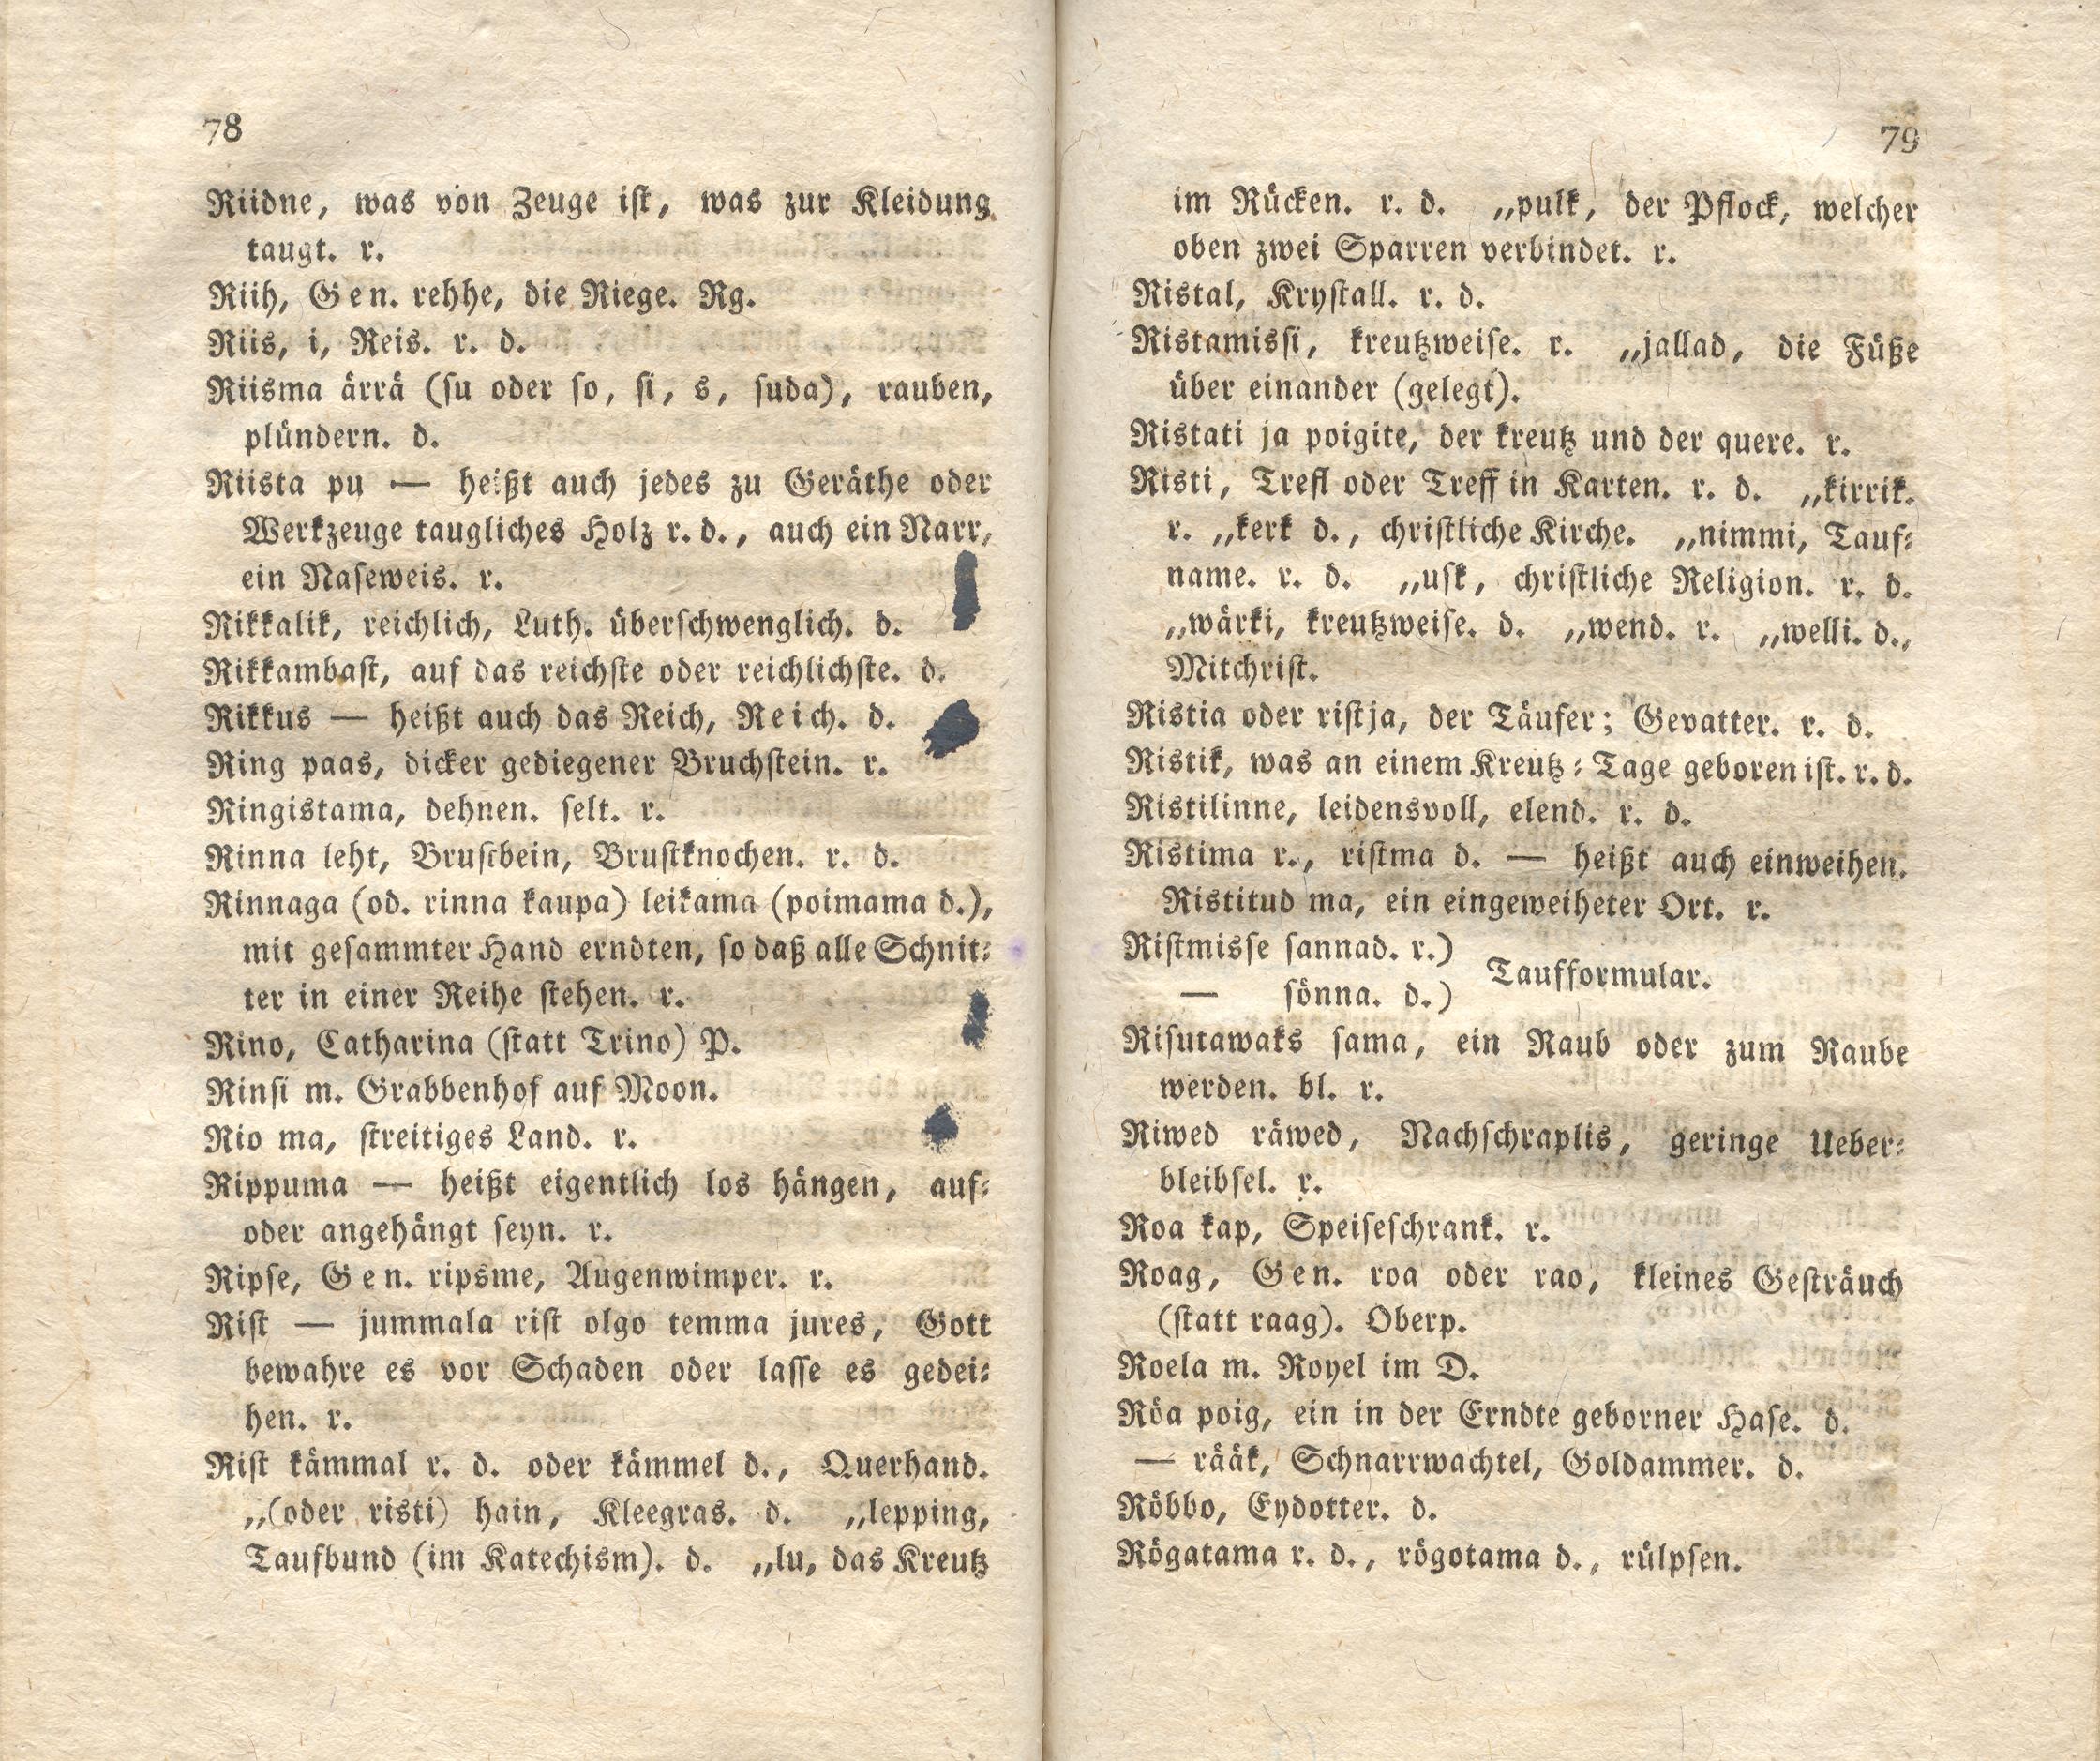 Beiträge [05] (1816) | 41. (78-79) Main body of text